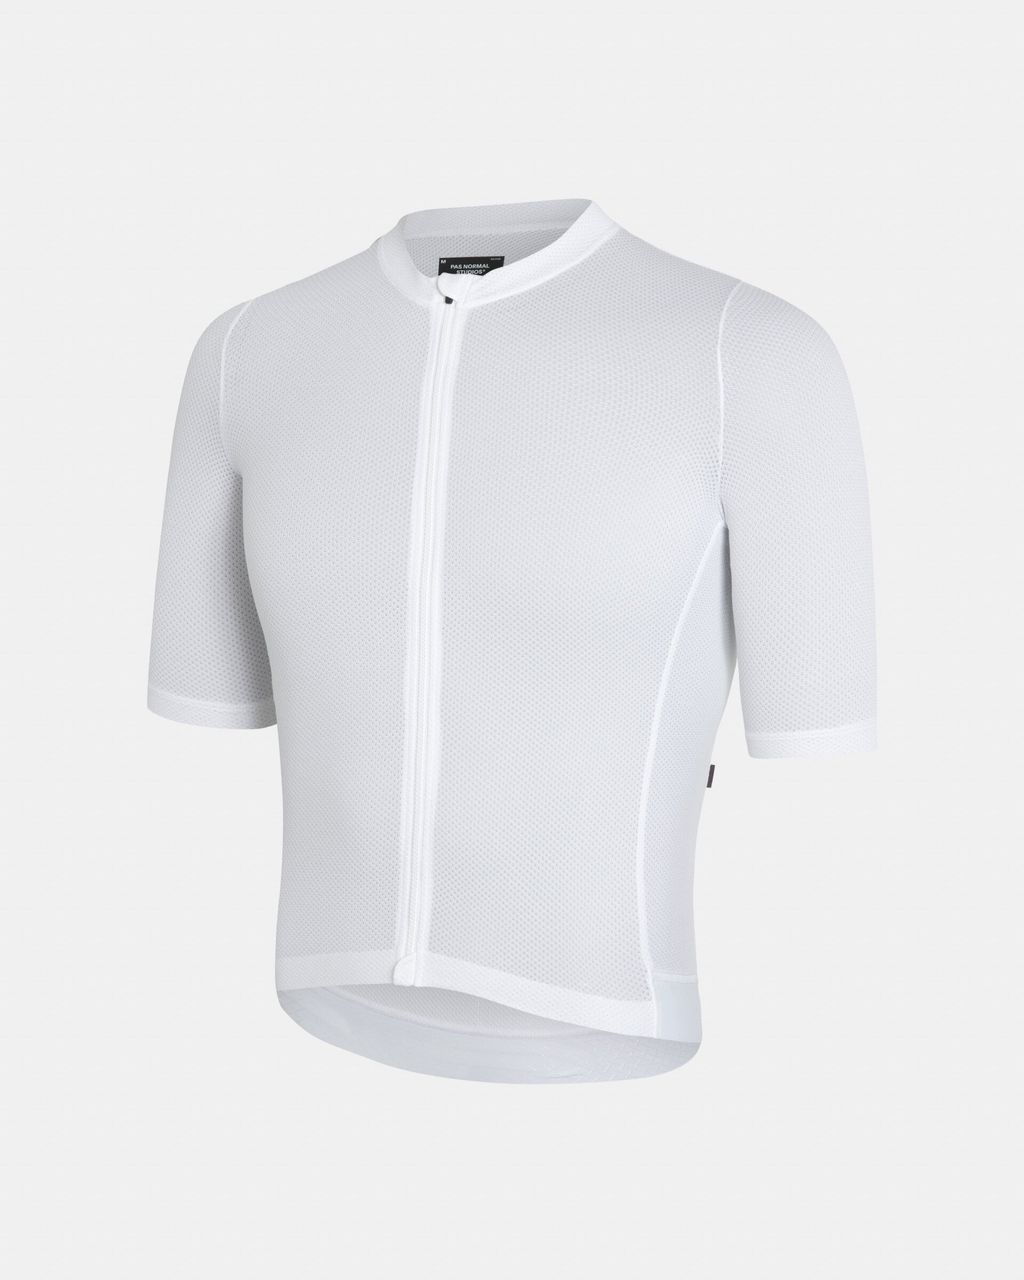 Mens-Solitude-Mesh-Jersey_White_Side-pdp-page